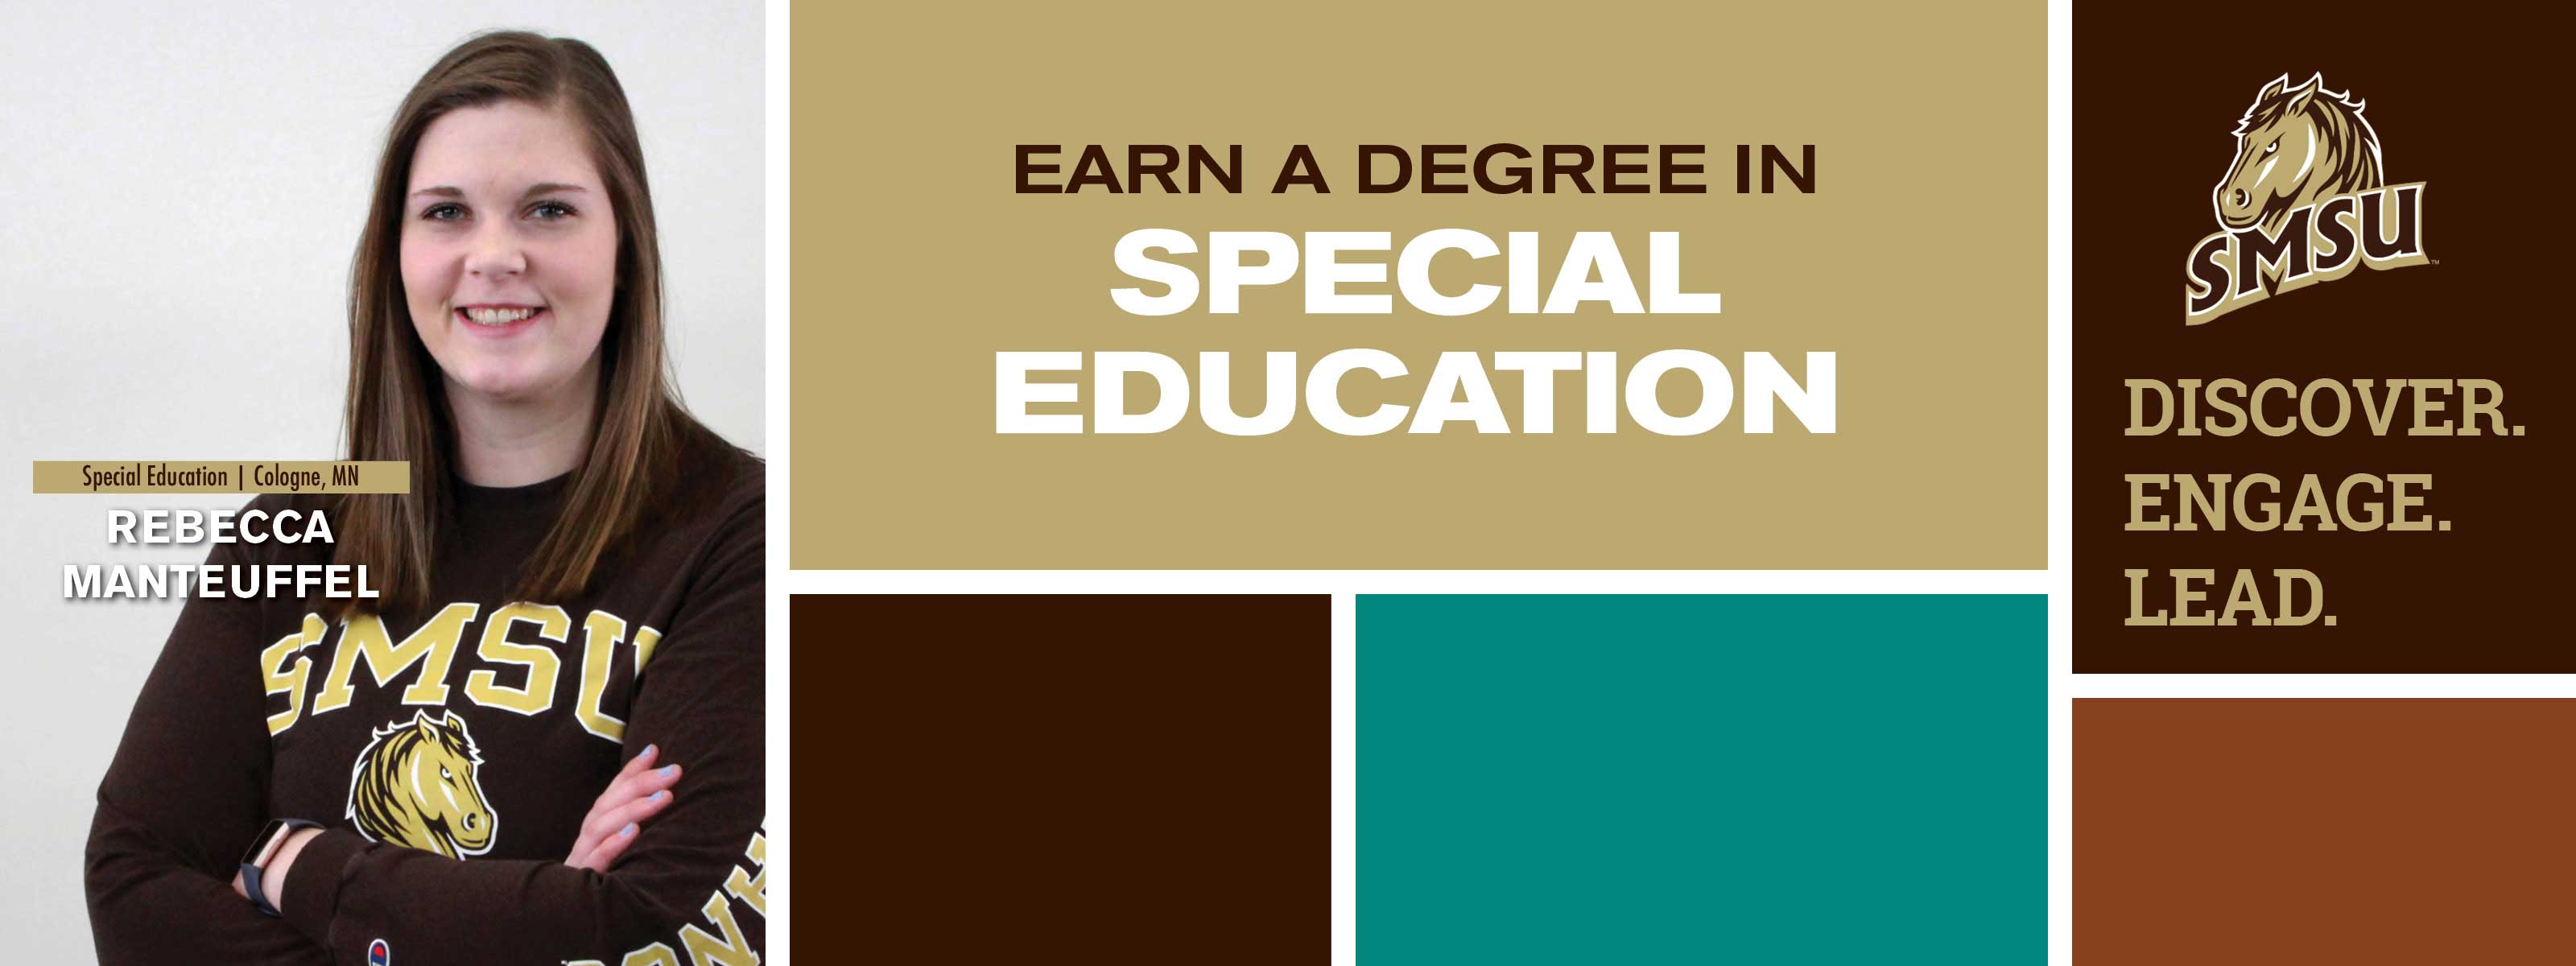 Earn a degree in Education - Discover. Engage. Lead.